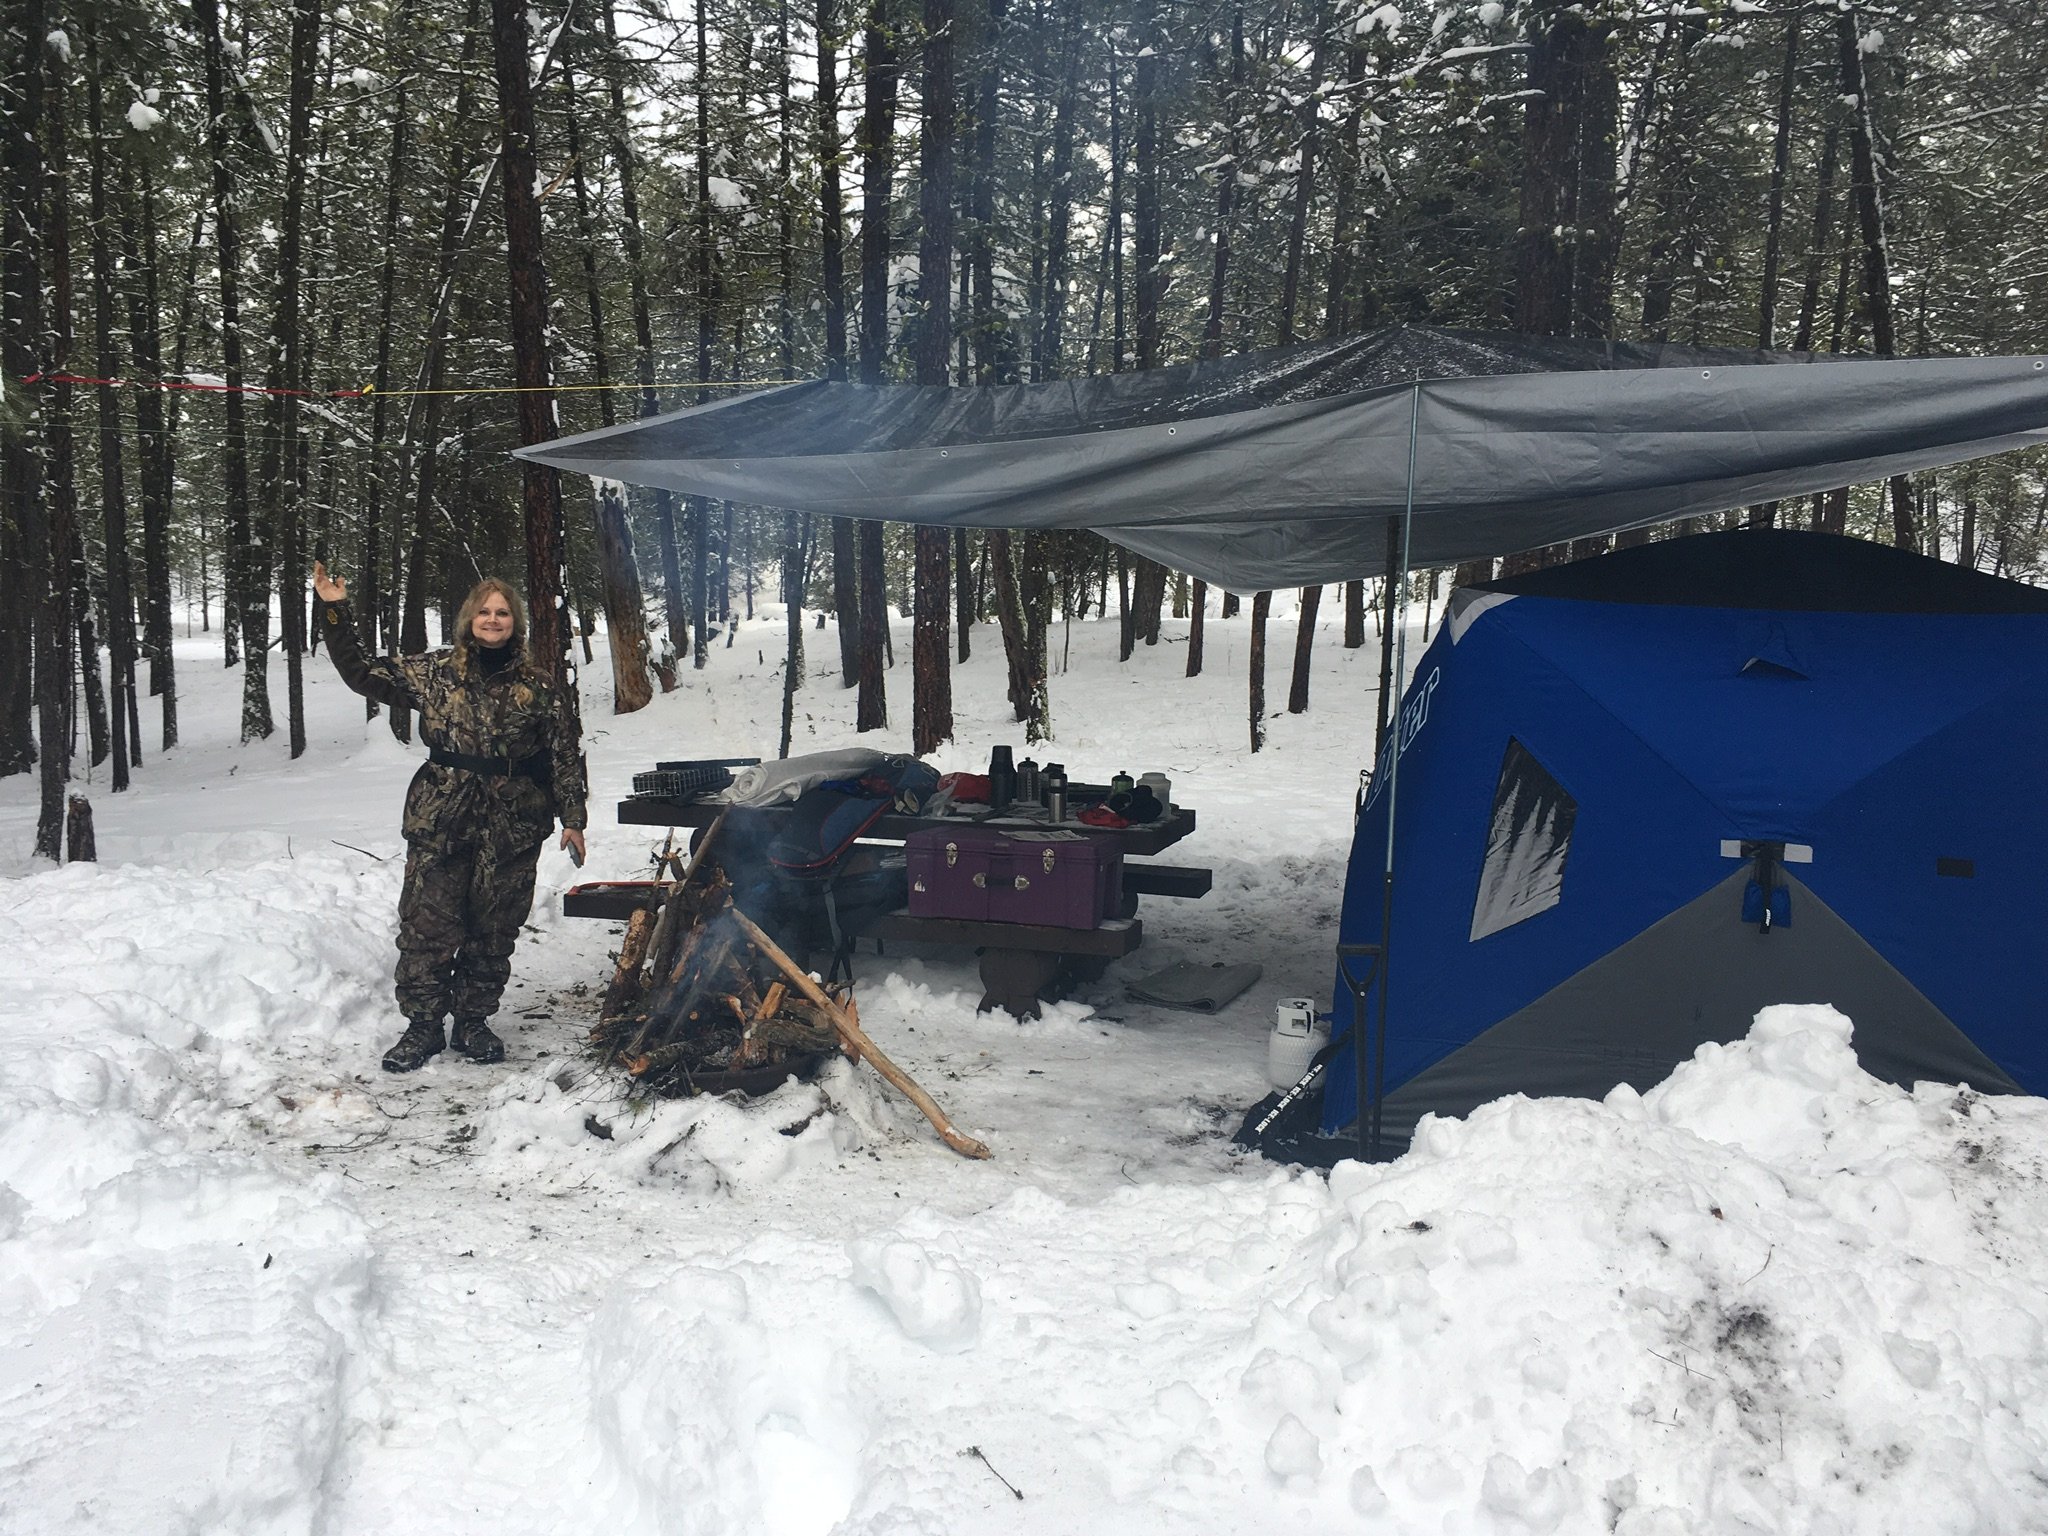 EVER SLEEP IN A POP UP SHELTER? - Ice Fishing Forum - Ice Fishing